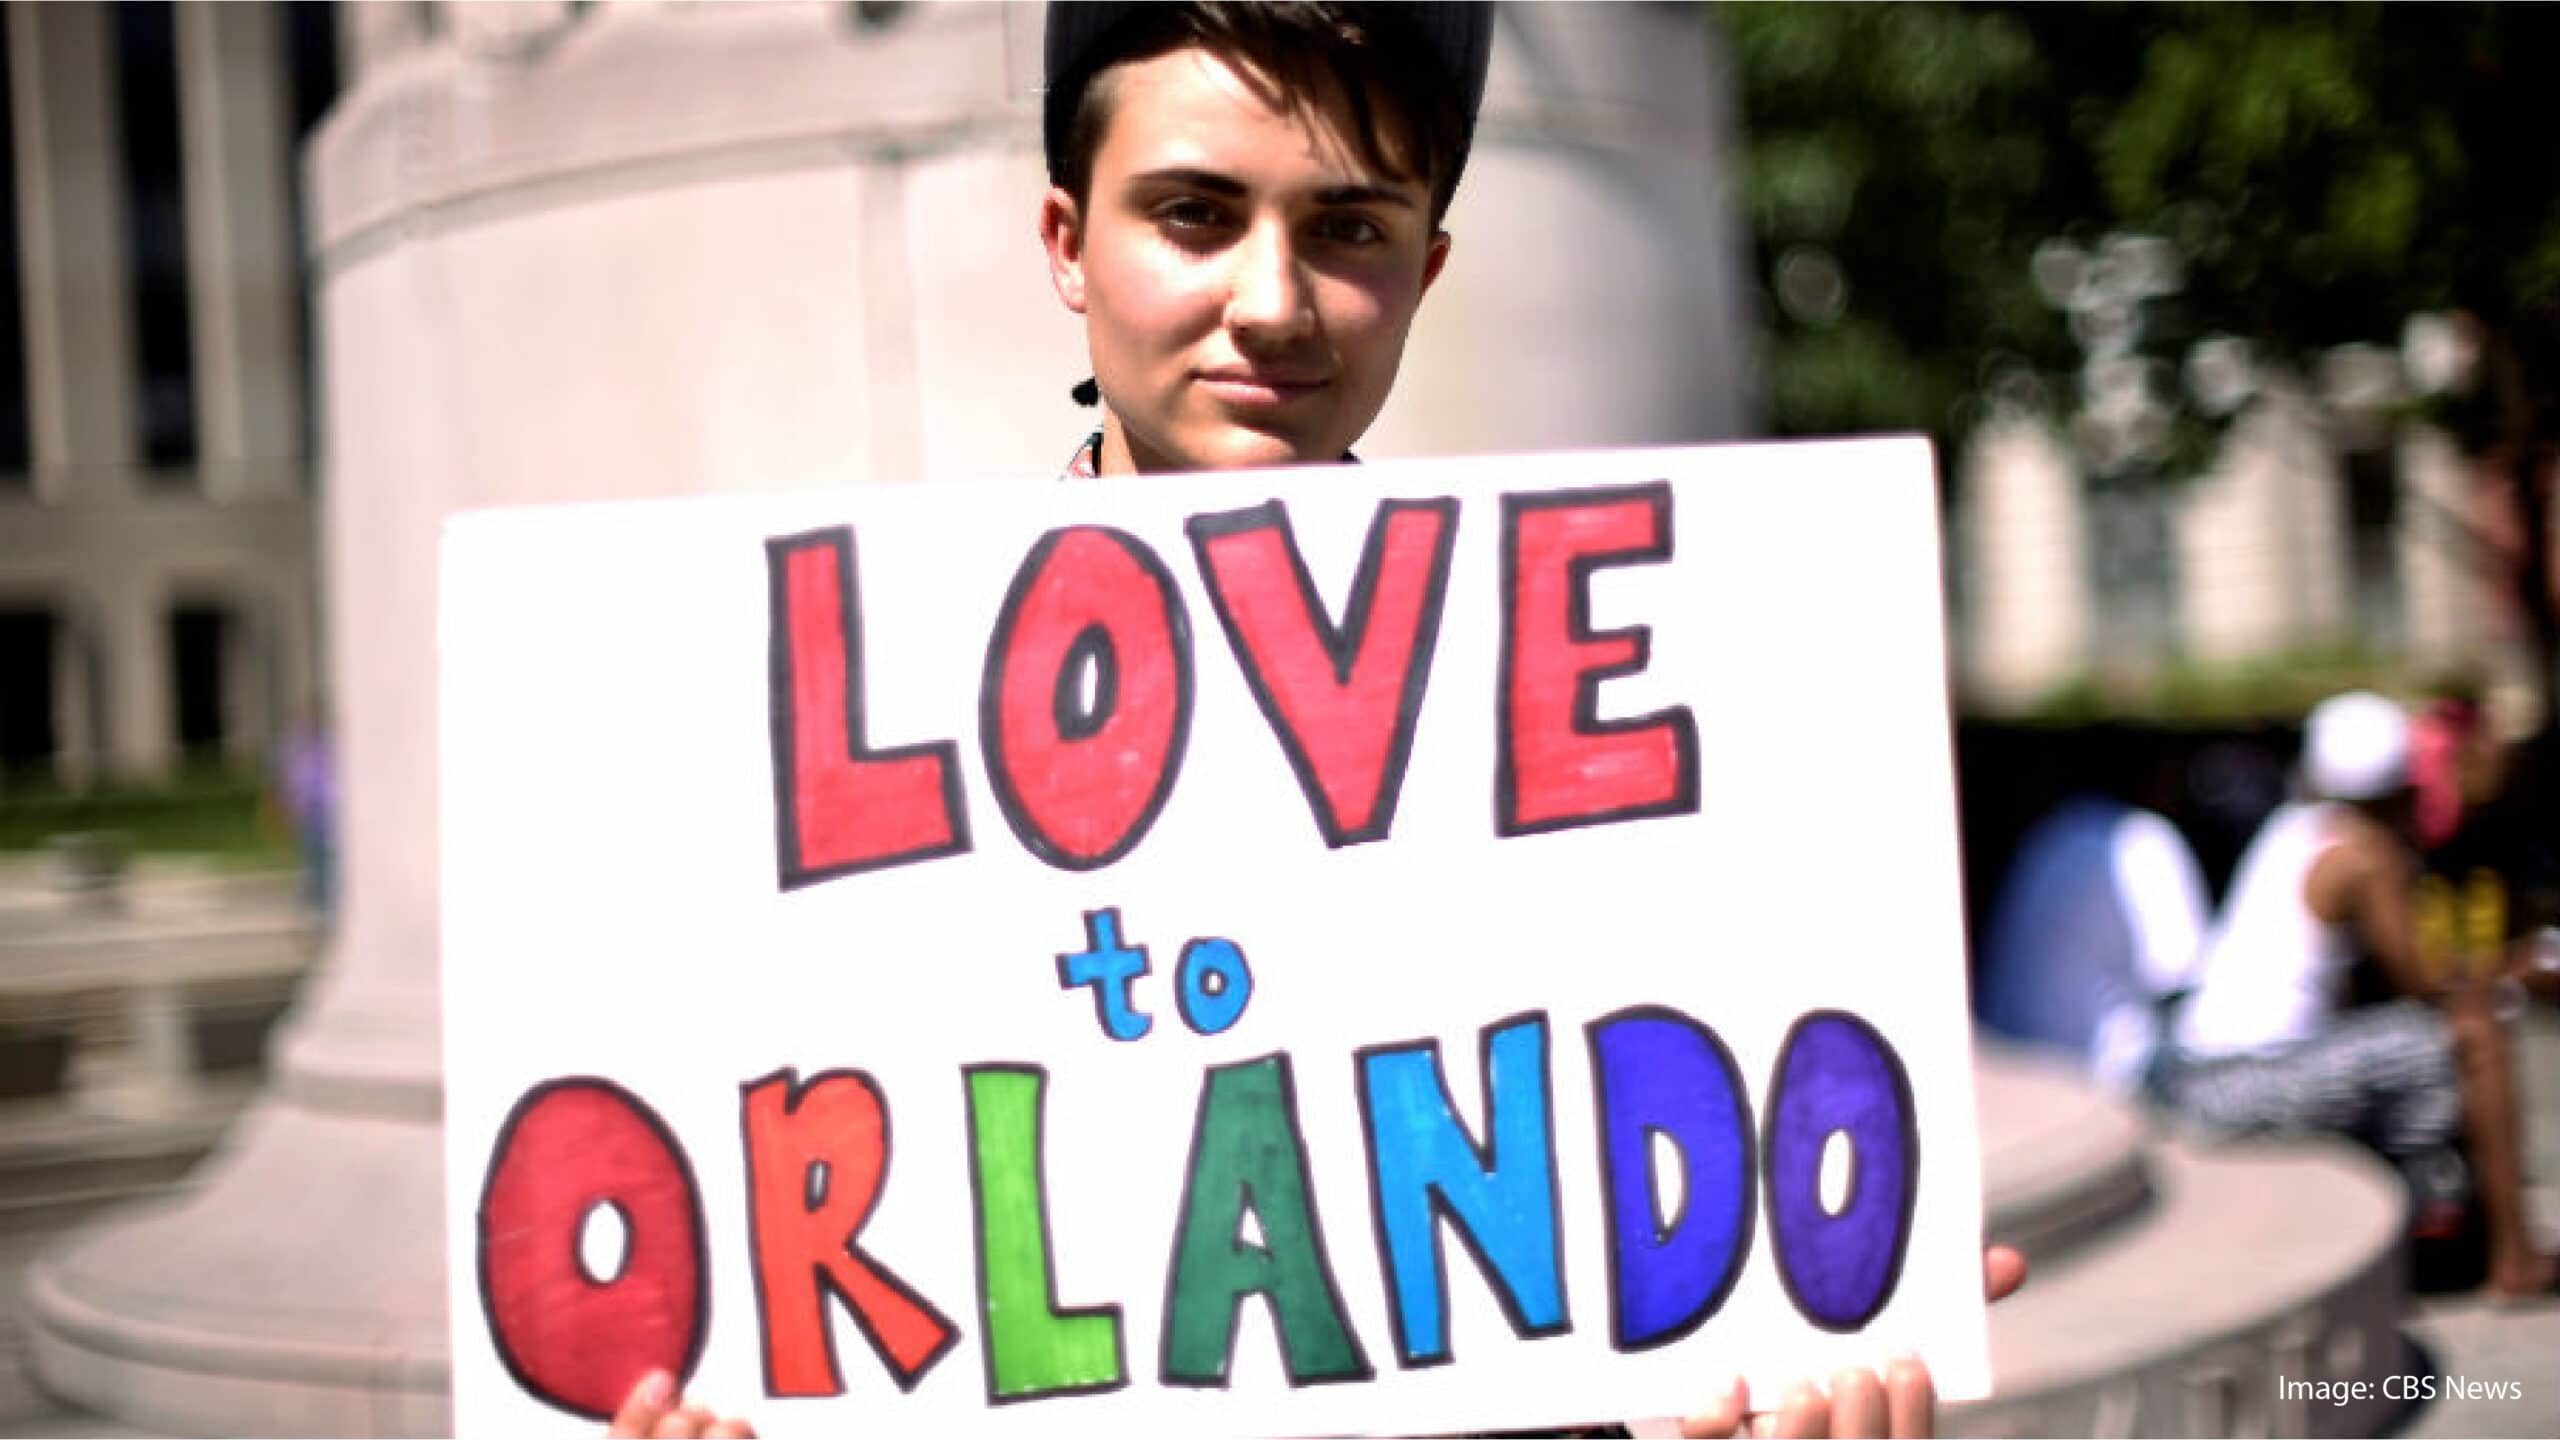 Man holding a sign that says "Love to Orlando"